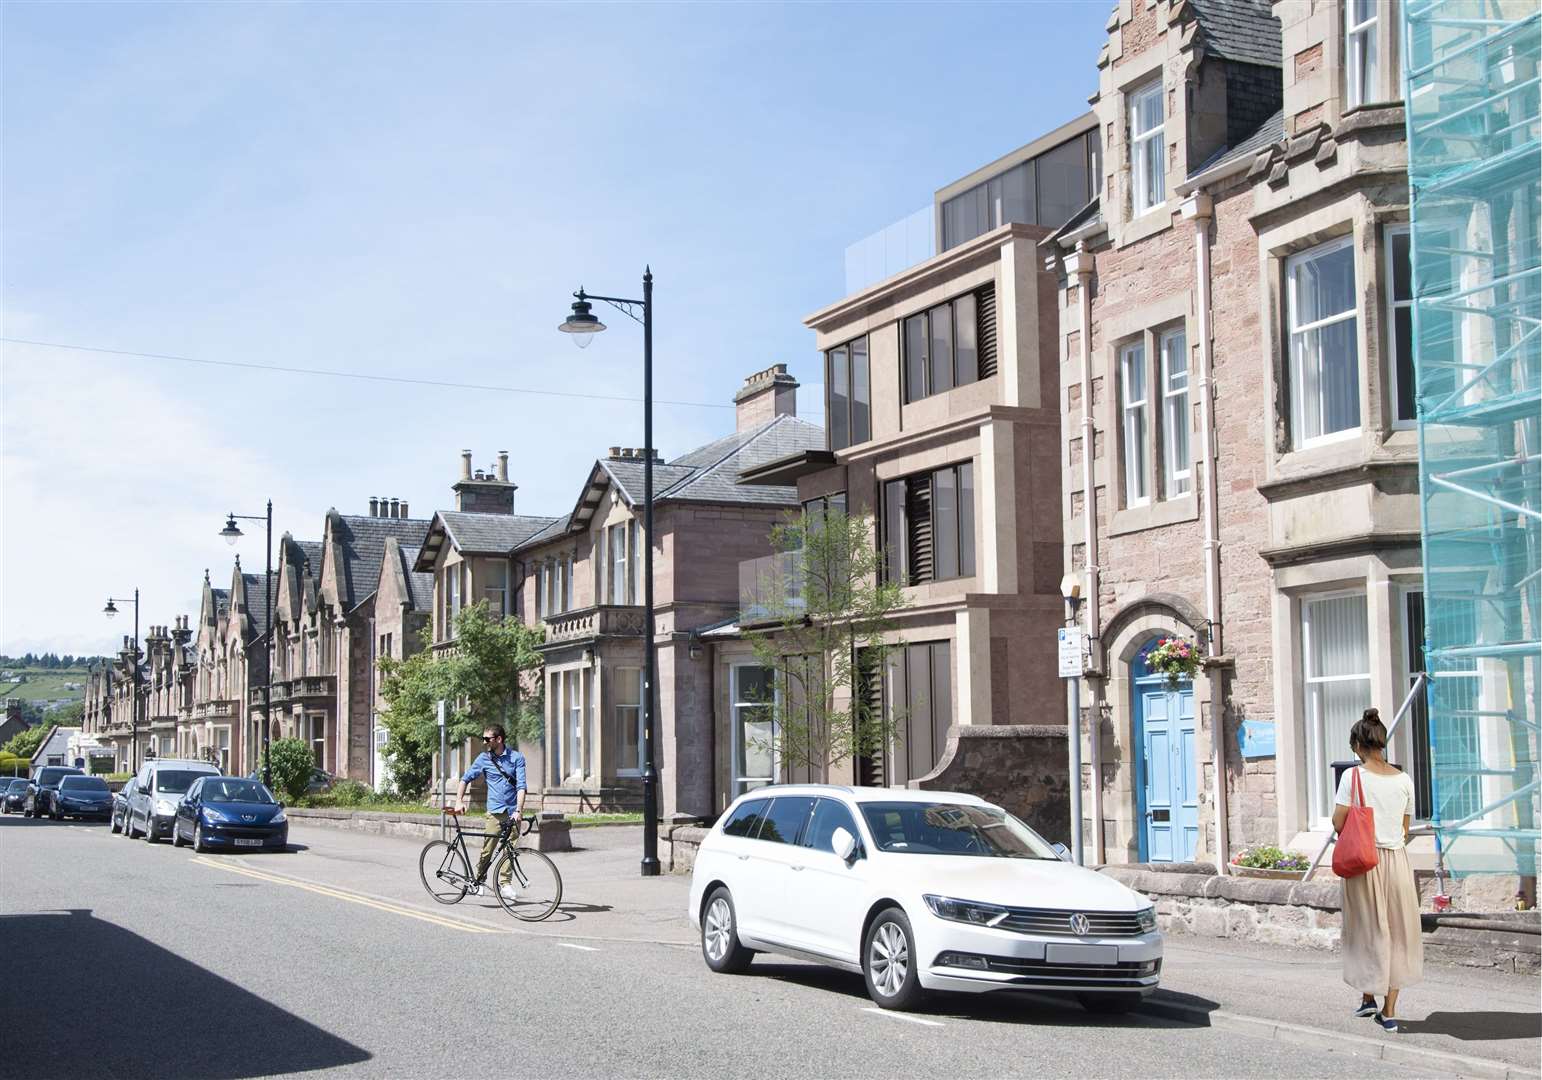 The proposed flats development in the historic Ardross Street which has now been rejected on appeal.